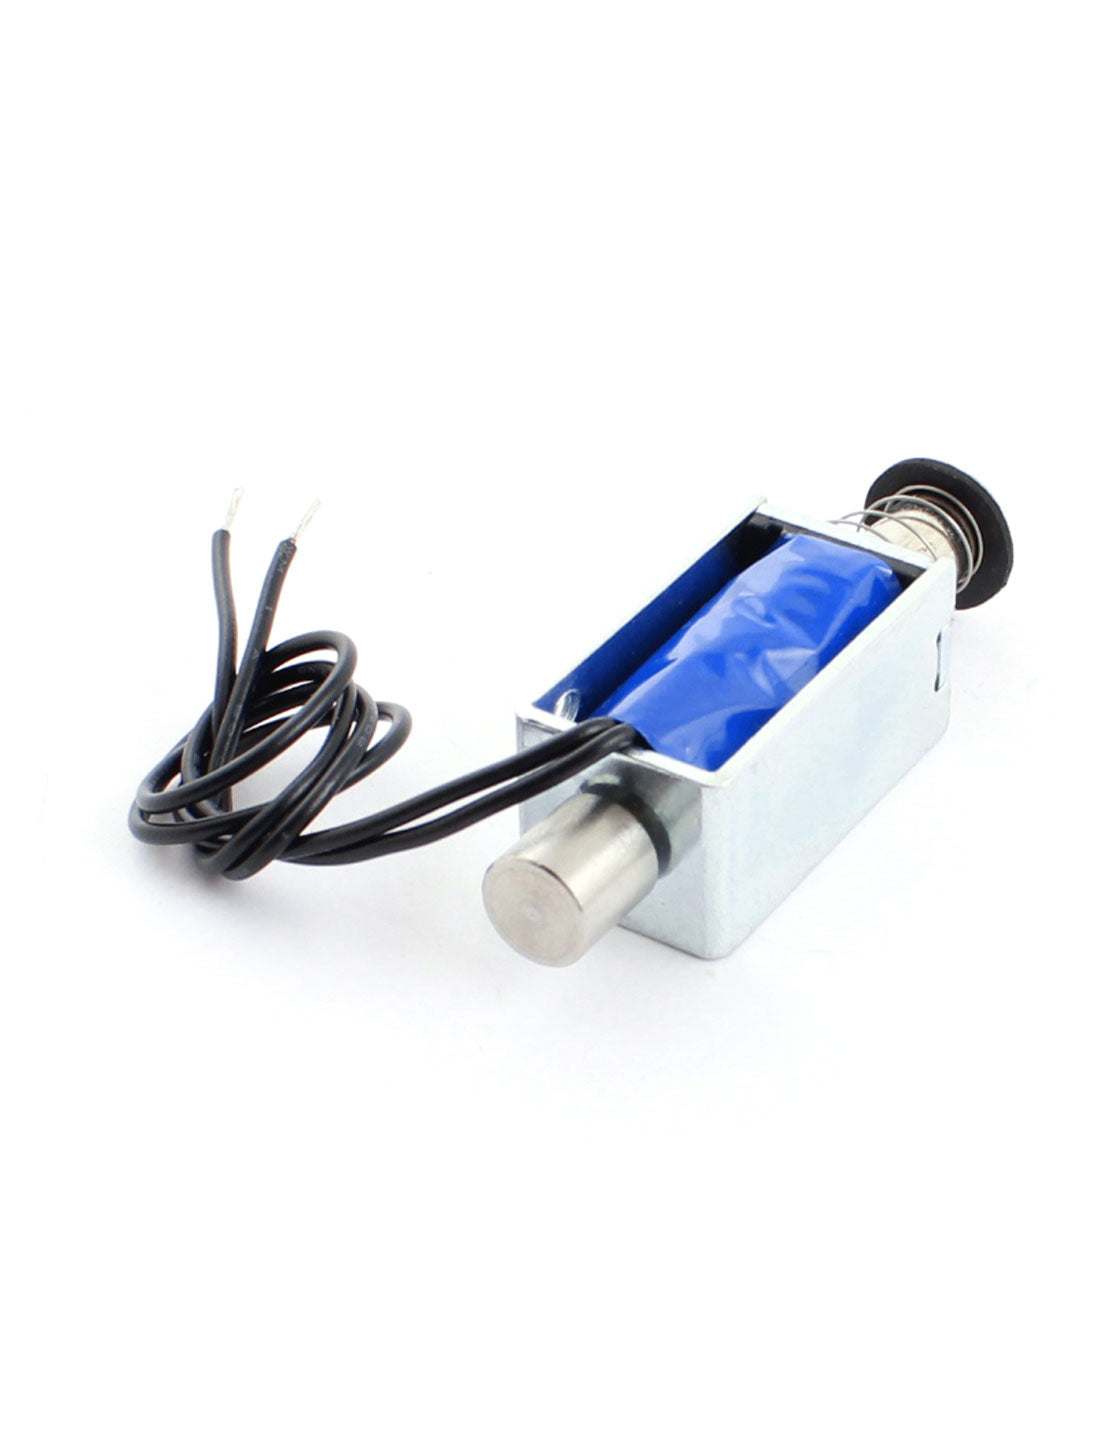 uxcell Uxcell DC 12V 1A 12W 5mm 40g Open Frame Spring Plunger Linear Motion Push Pull Type Solenoid Electromagnet Actuator